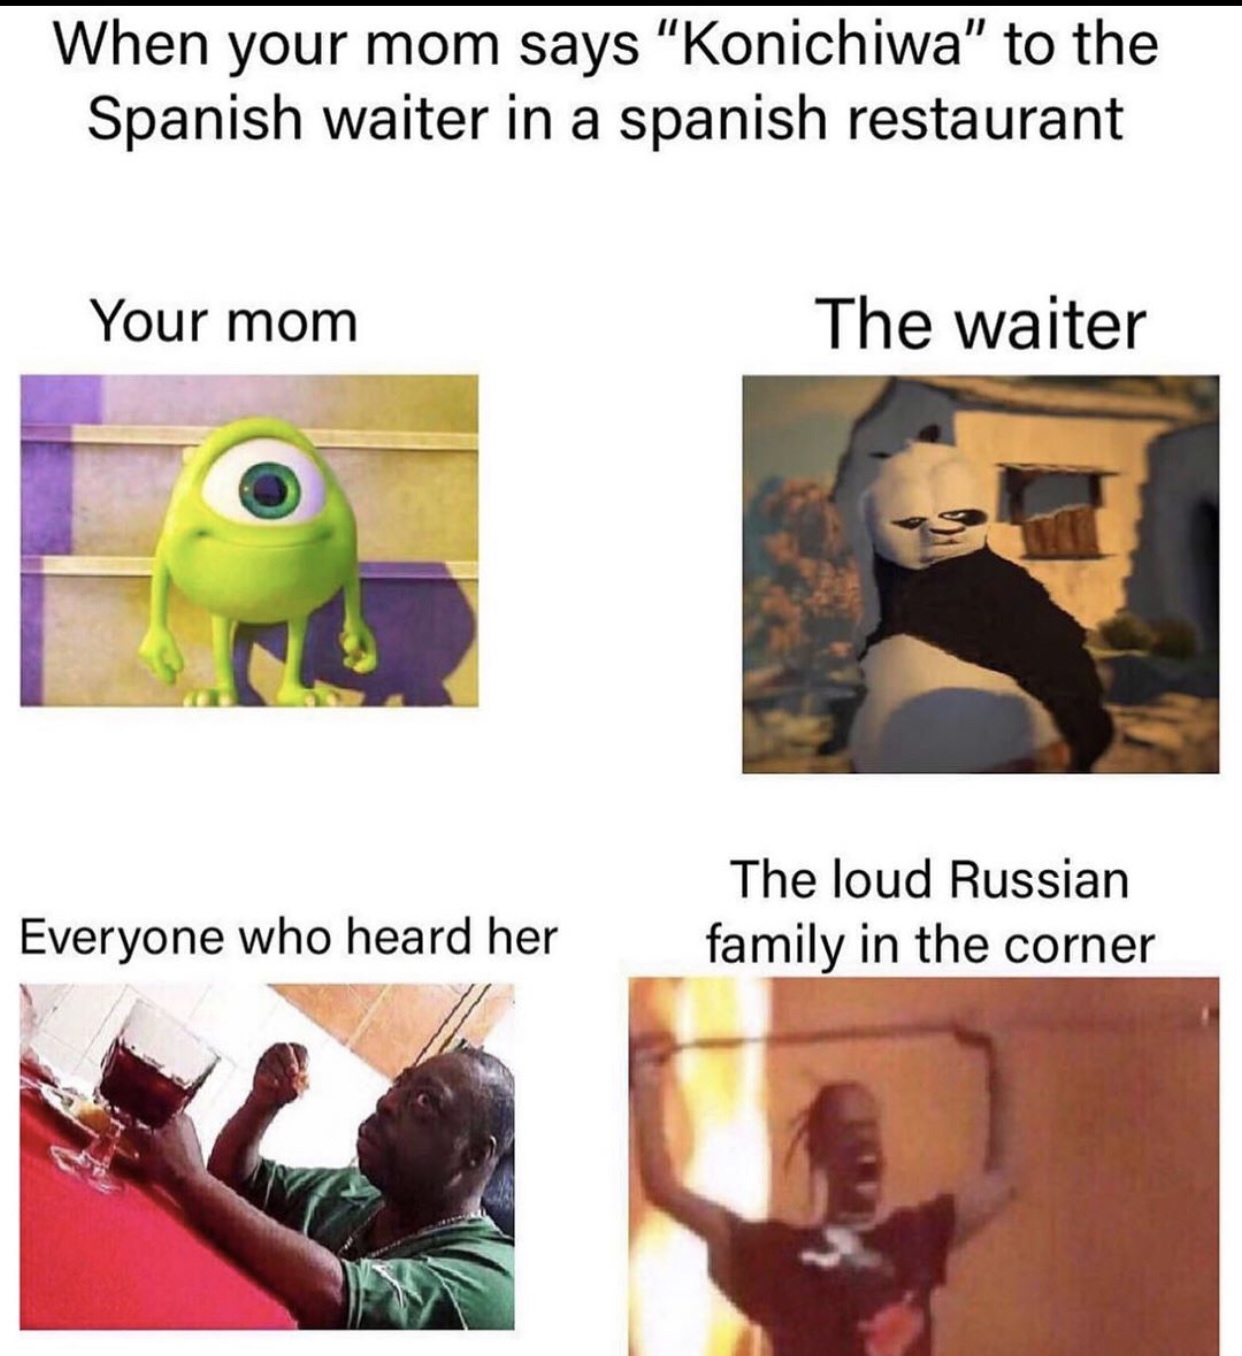 your mom says konichiwa to the spanish waiter - When your mom says "Konichiwa" to the Spanish waiter in a spanish restaurant Your mom The waiter The loud Russian family in the corner Everyone who heard her